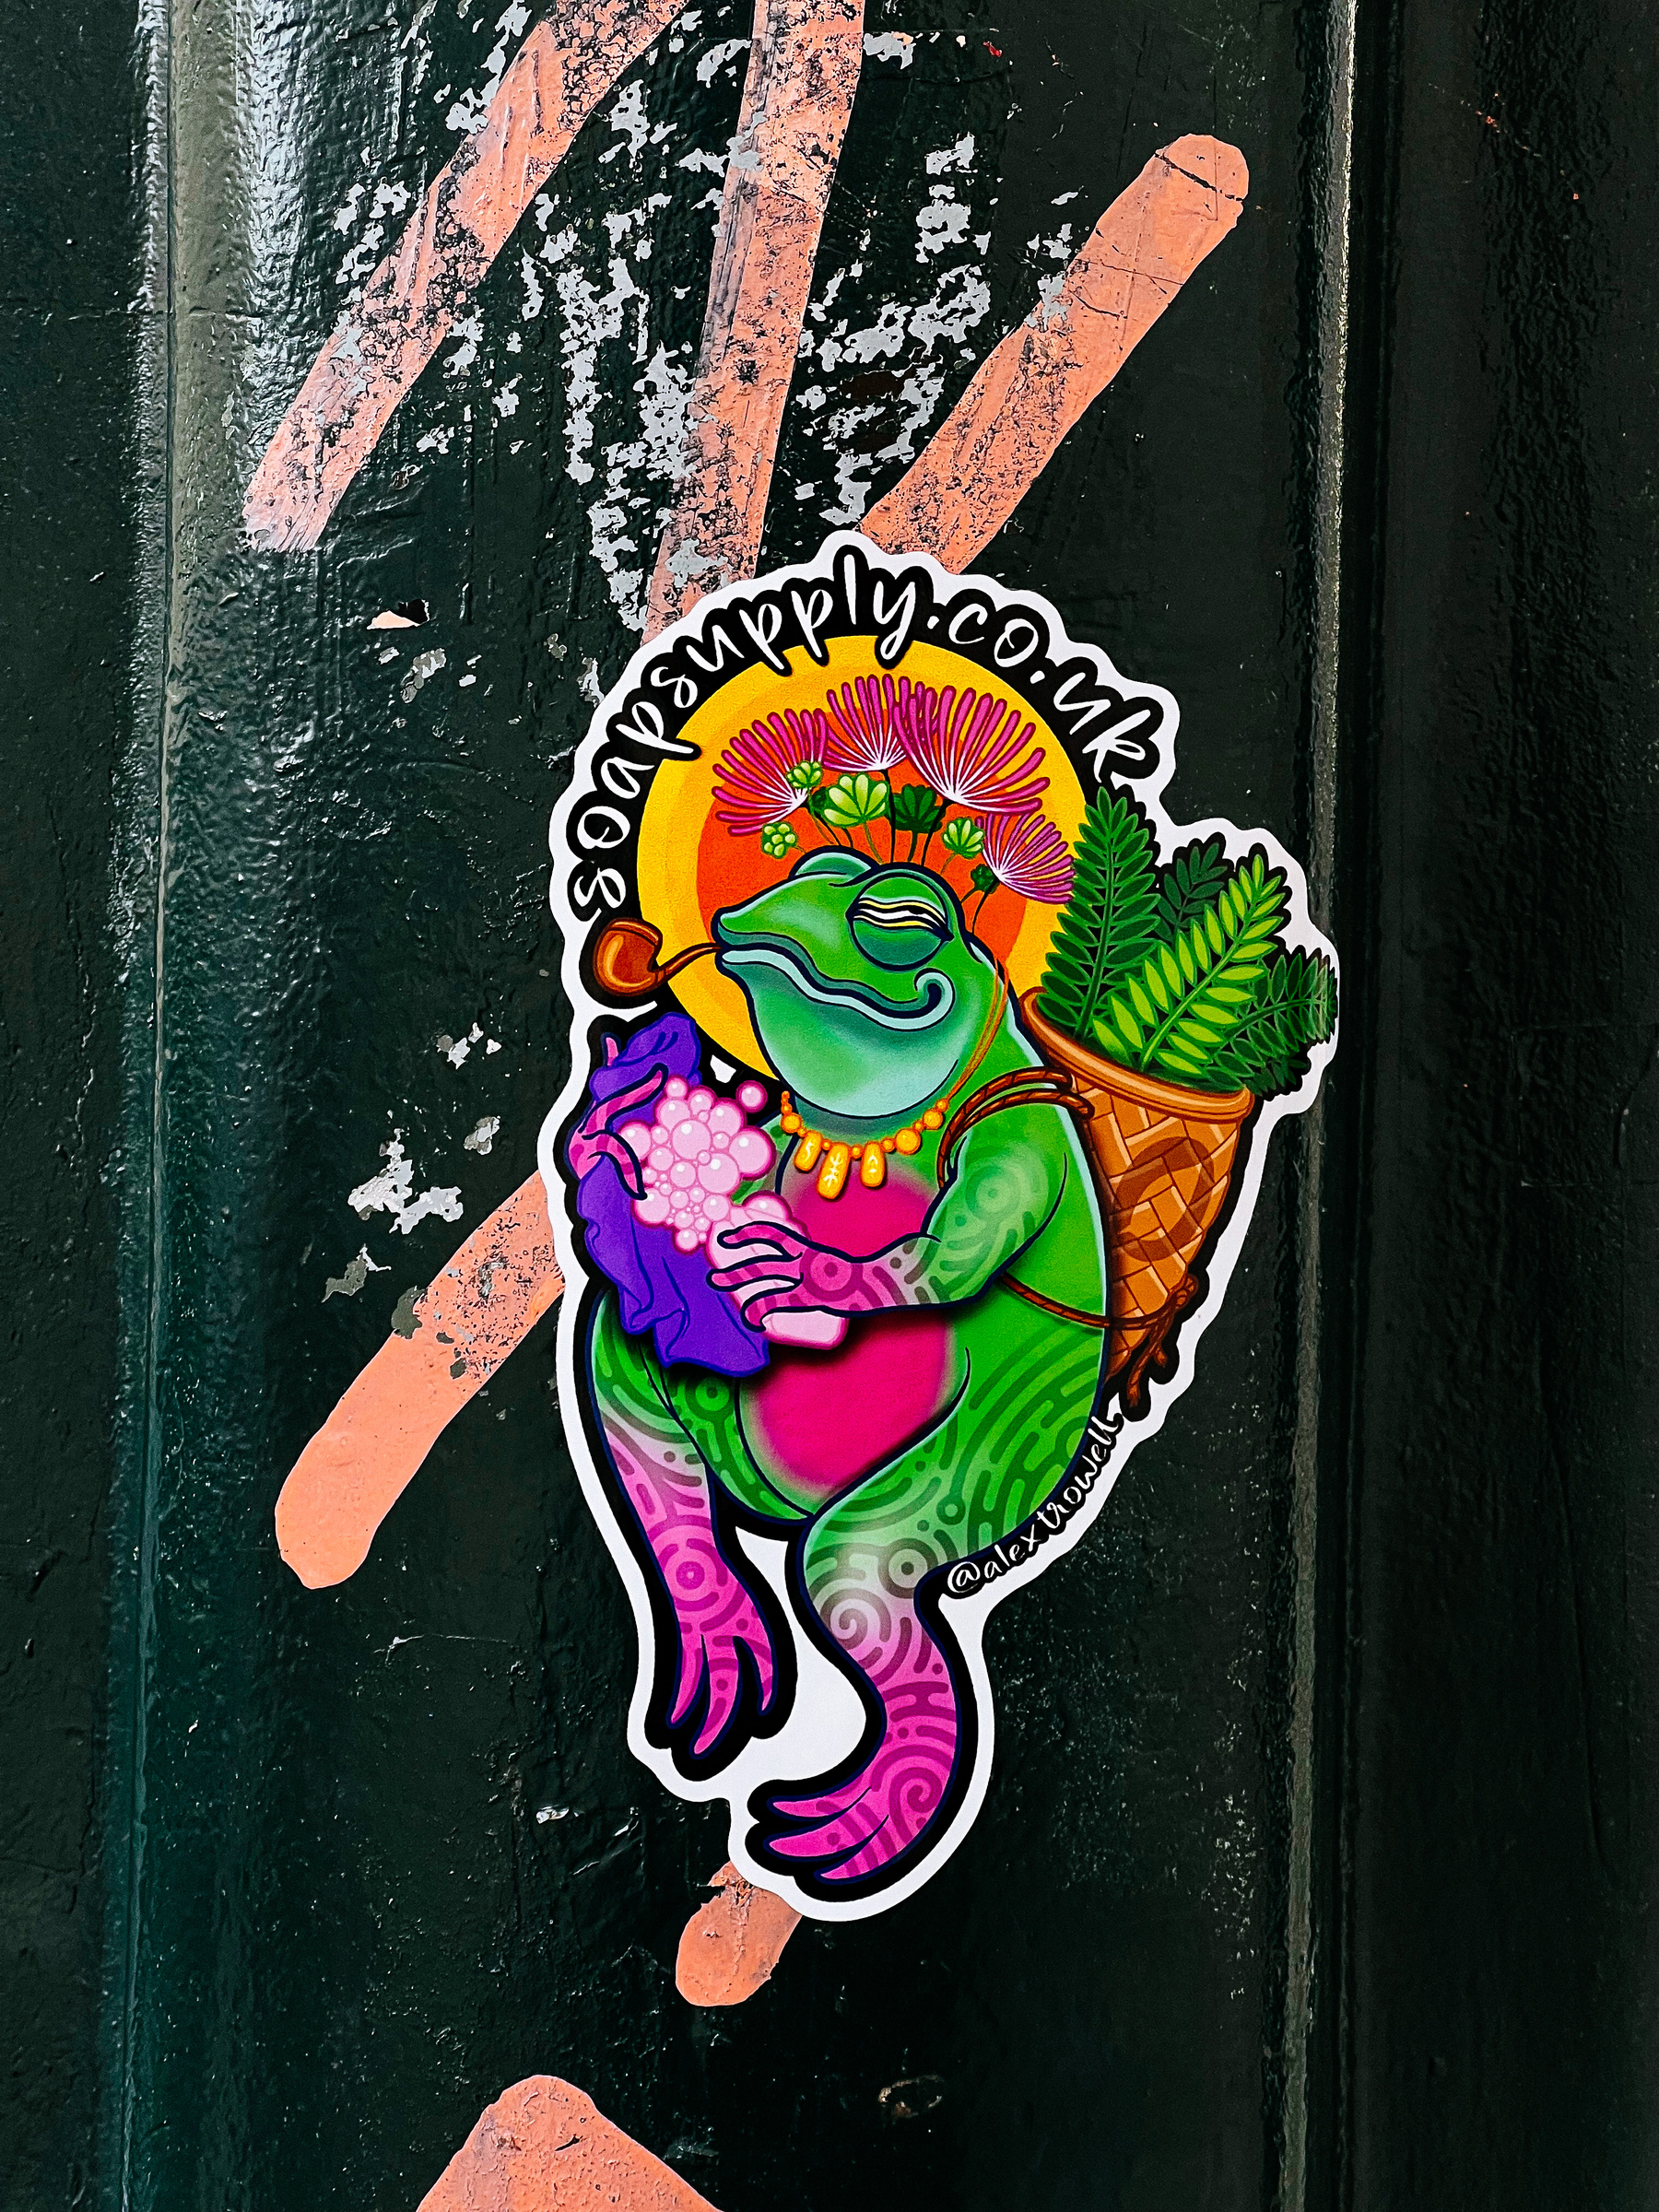 Sticker of a very colorful frog, holding a towel and a bar of soap, with a basket filled with leaves on his back. 